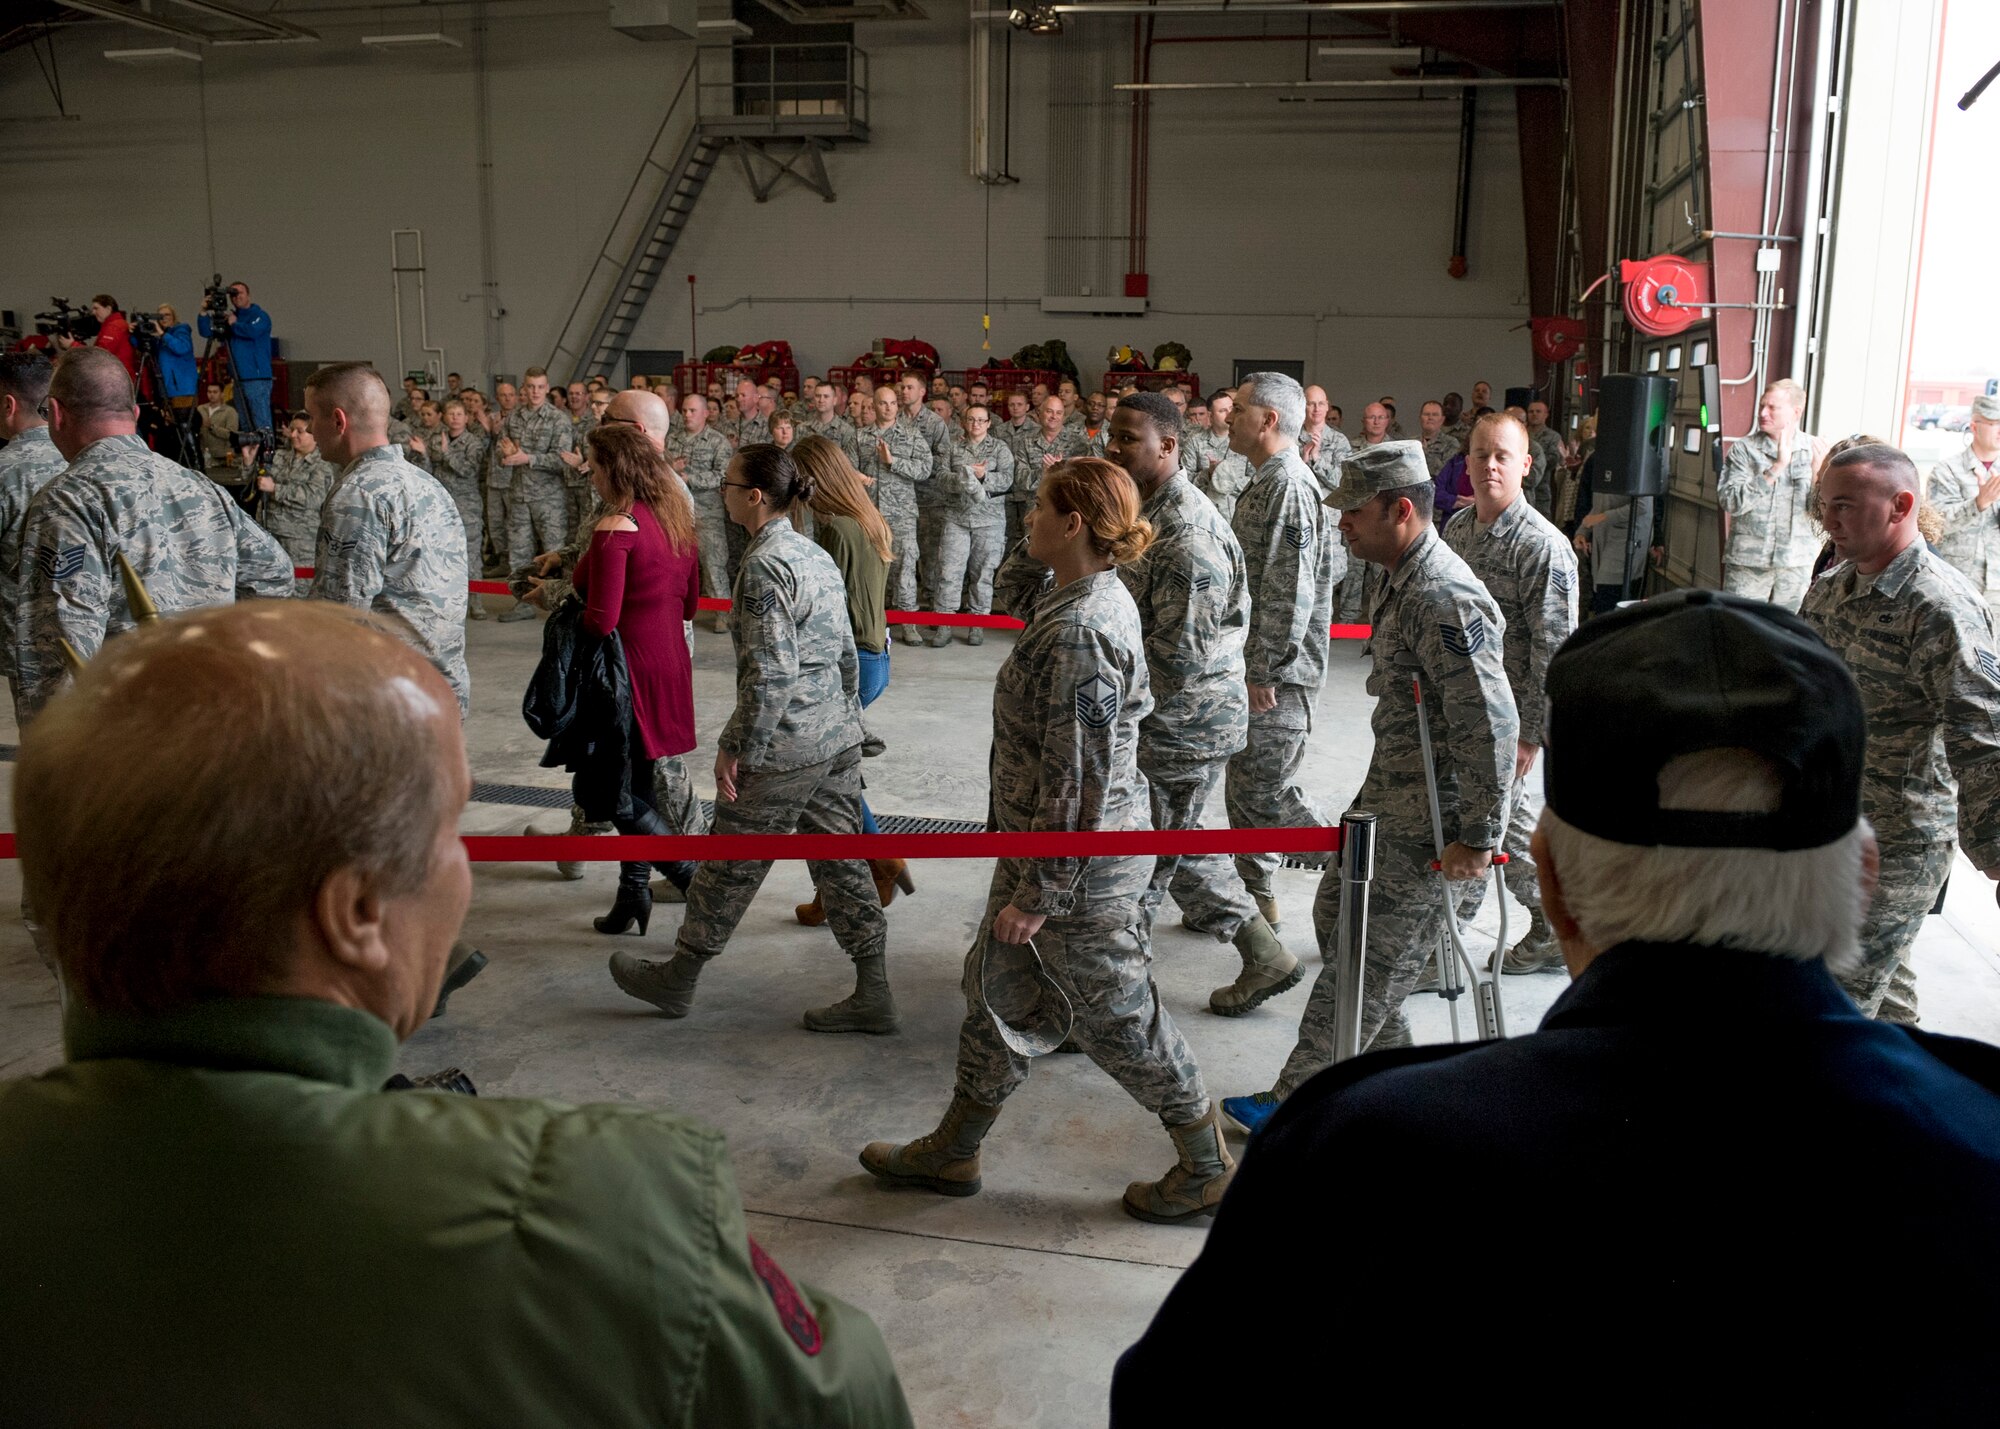 Fellow Airmen, family and supporters welcome home over 91 Airmen from deployment during a ceremony at the 138th Fighter Wing in Tulsa, Okla., March 5, 2017. The ceremony was held to welcome the Airmen home and recognize their efforts and contributions made overseas while deployed. (U.S. Air National Guard photo by Senior Airman Rebecca Imwalle)